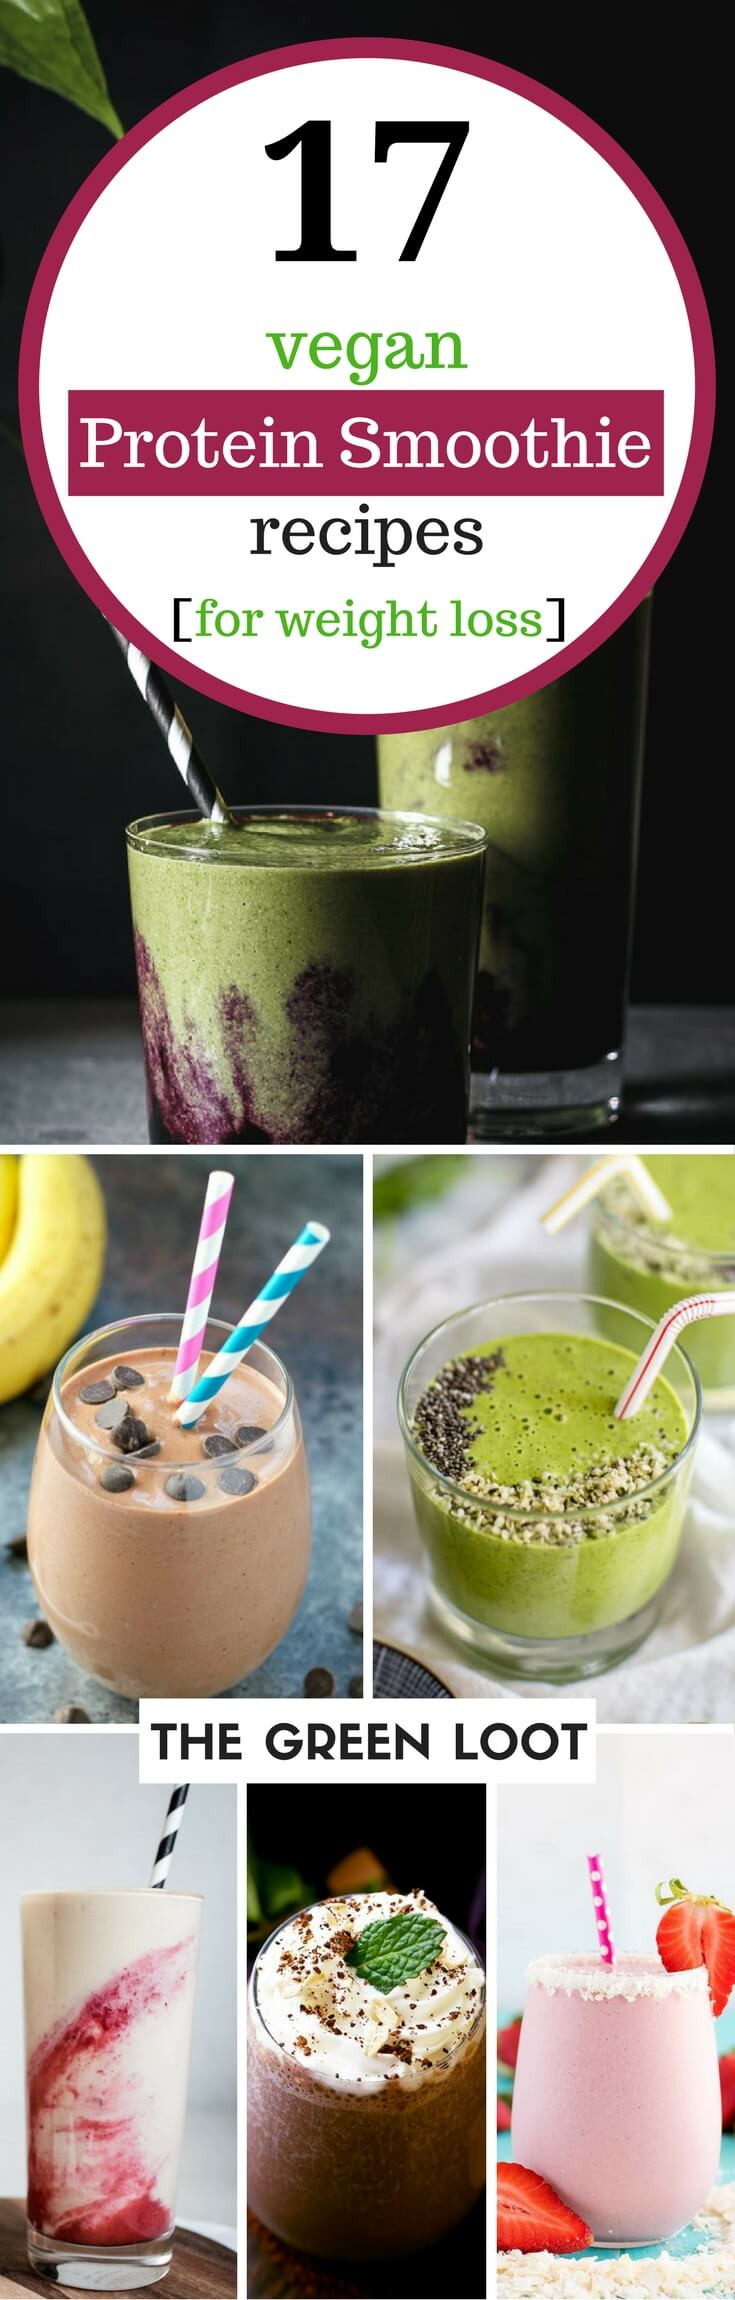 Healthy Banana Smoothie Recipes For Weight Loss
 17 Tasty Vegan Protein Smoothie Recipes for Weight Loss